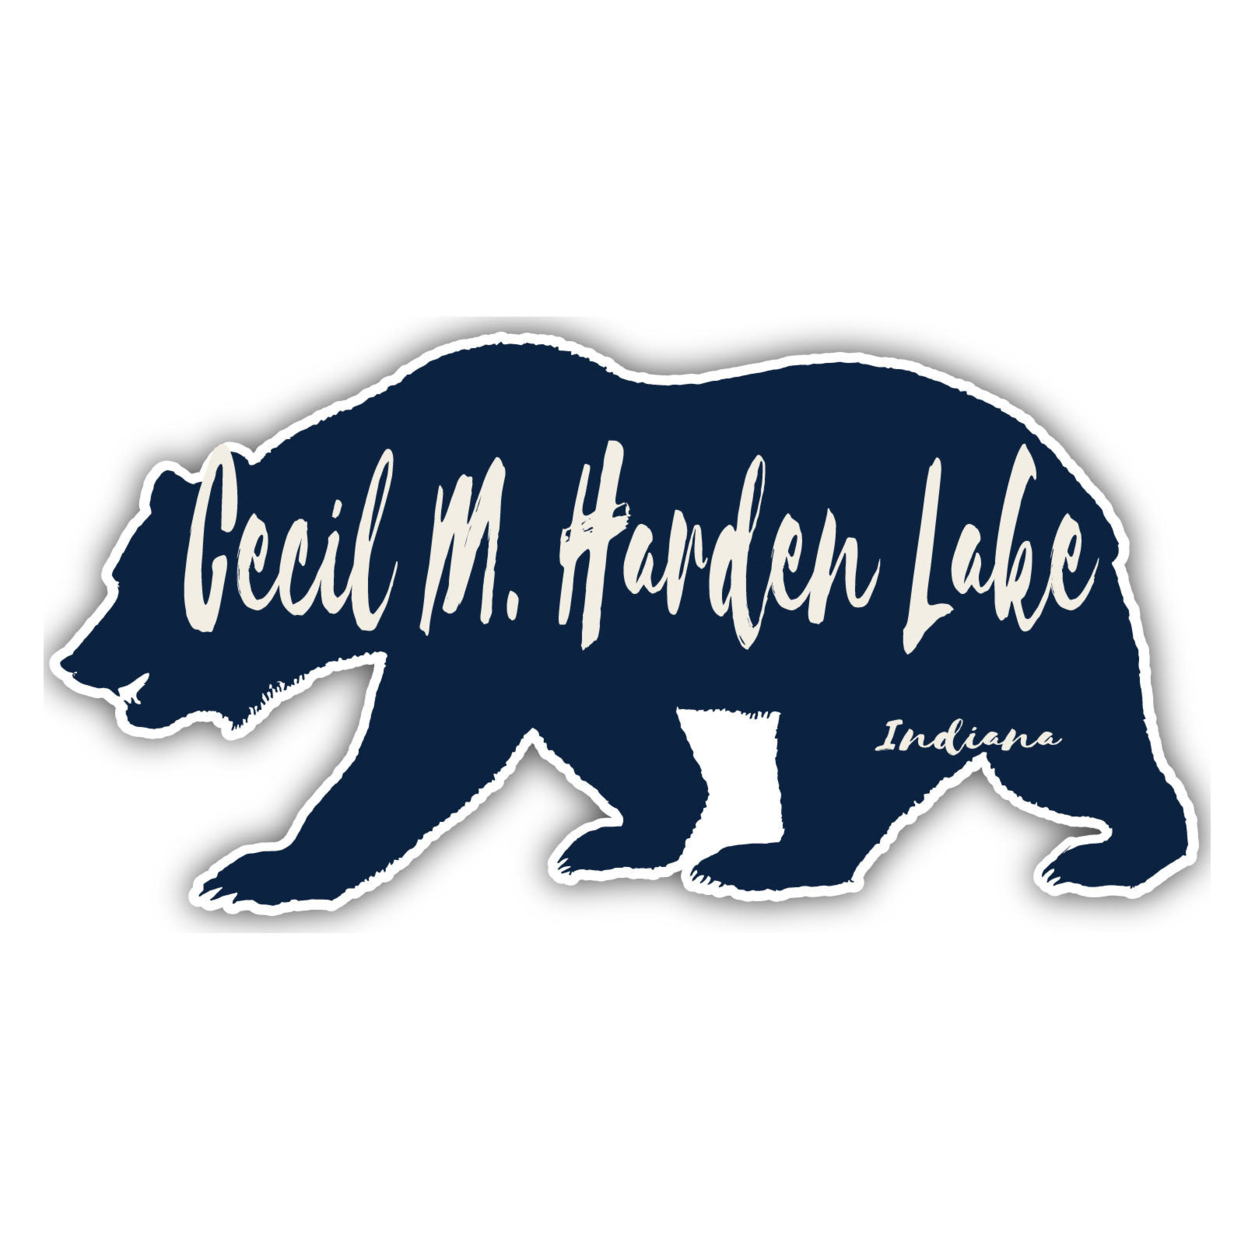 Cecil M. Harden Lake Indiana Souvenir Decorative Stickers (Choose Theme And Size) - 4-Pack, 2-Inch, Bear